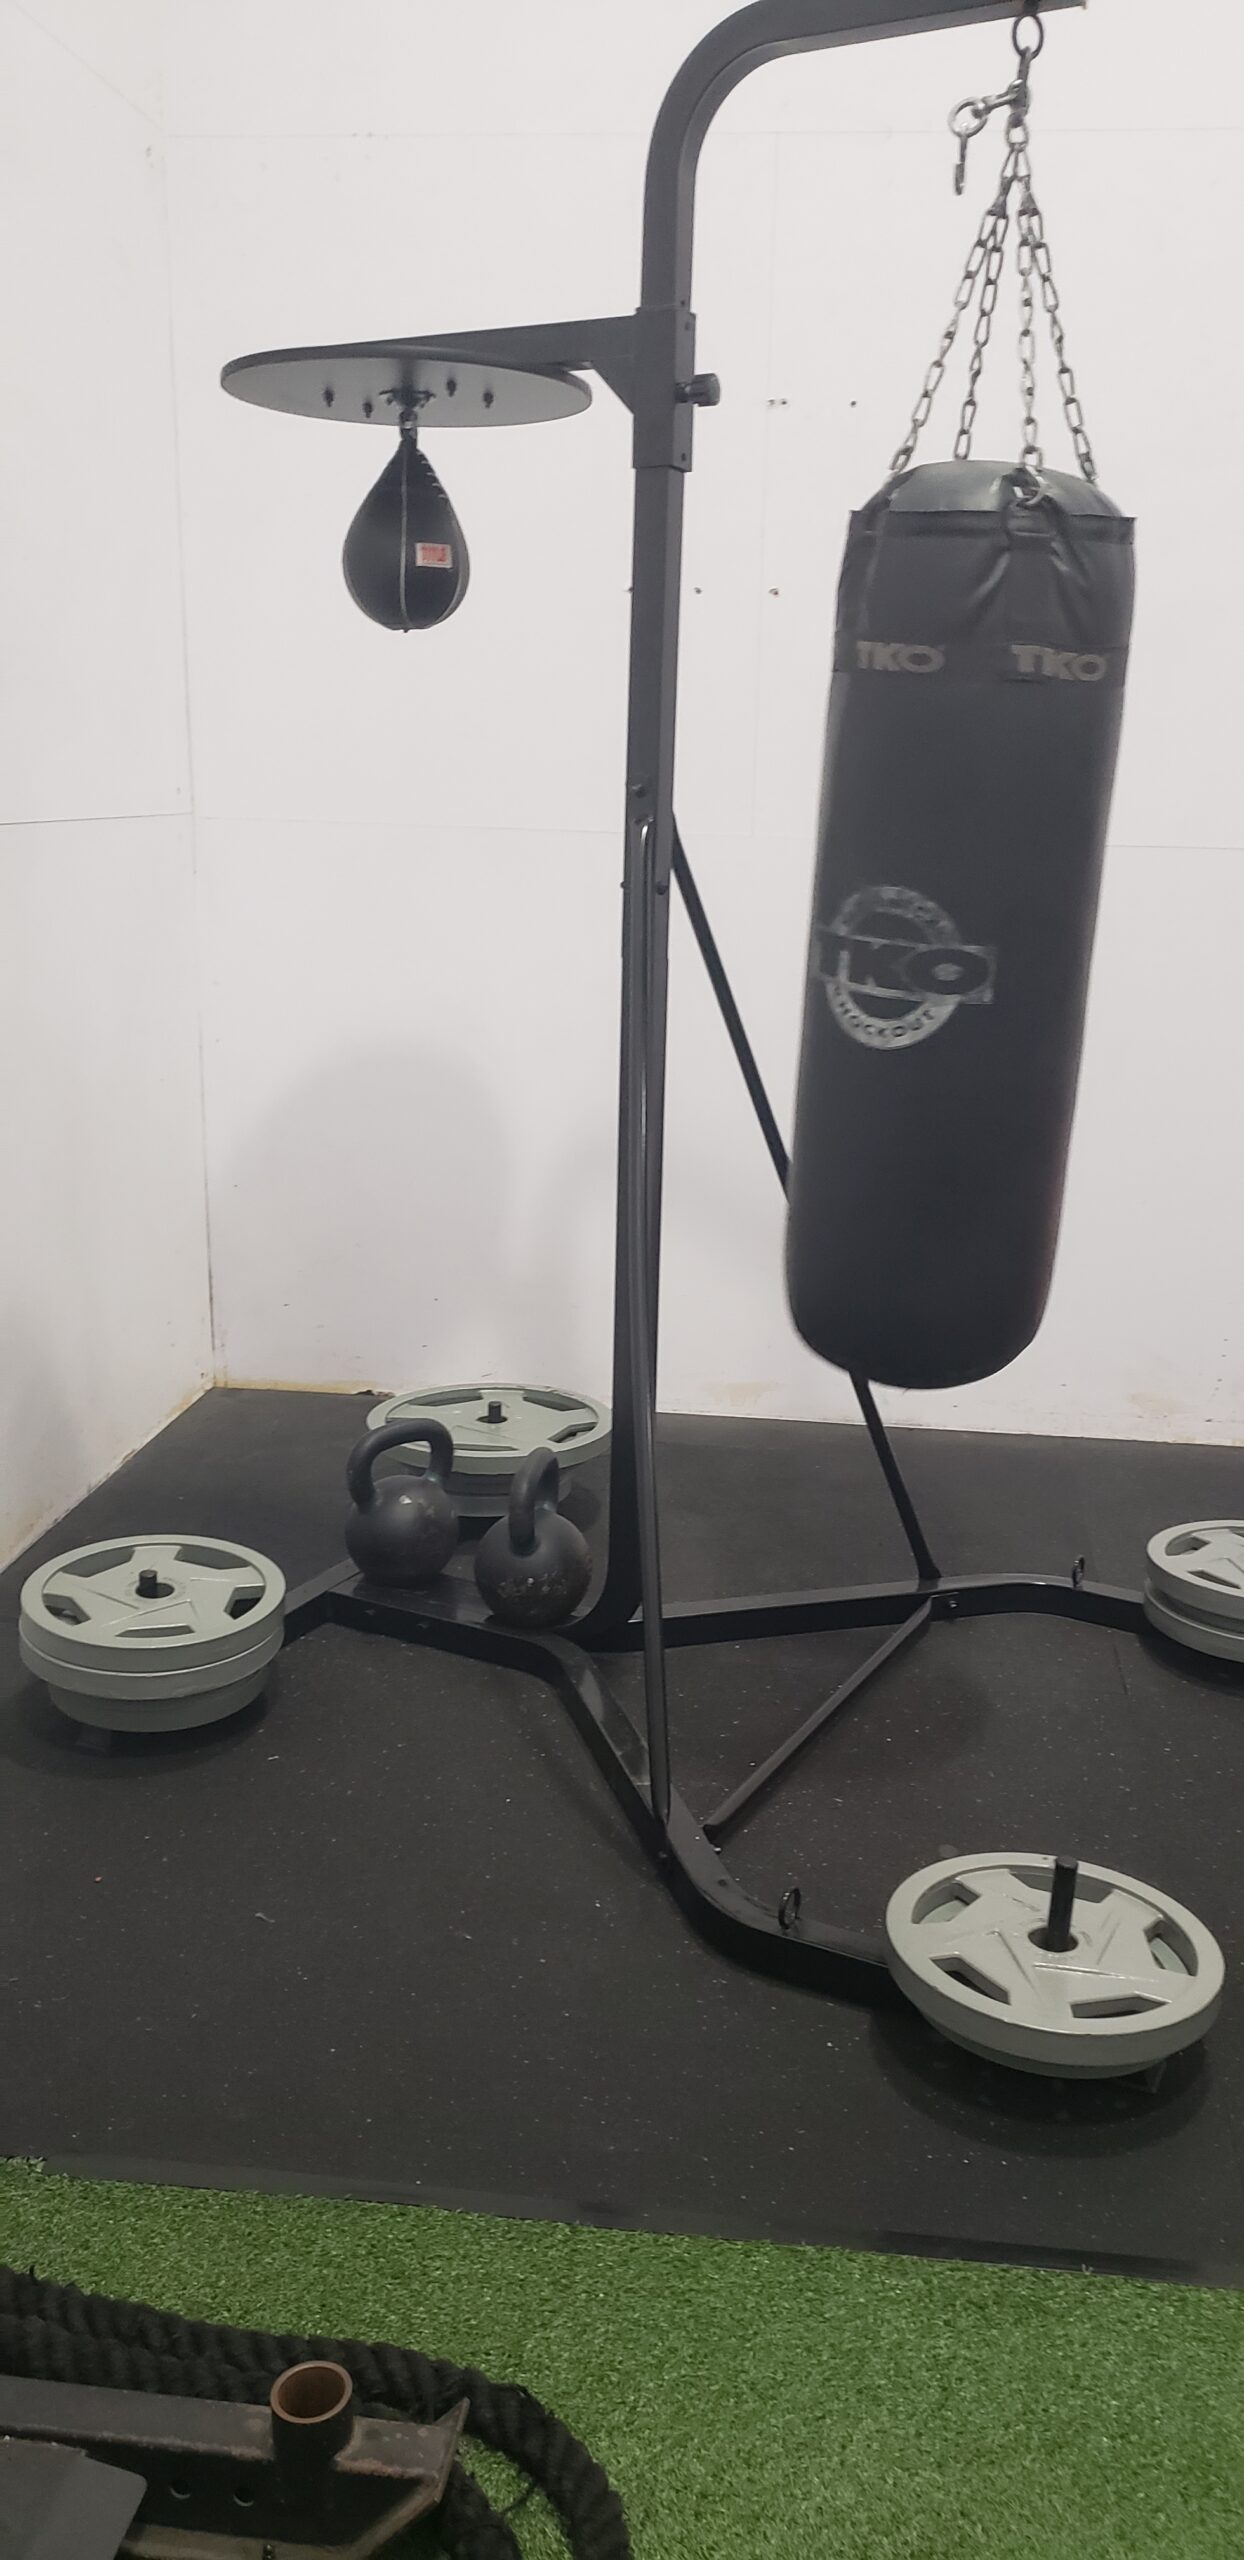 New Heavybag stand – I’m not a fan